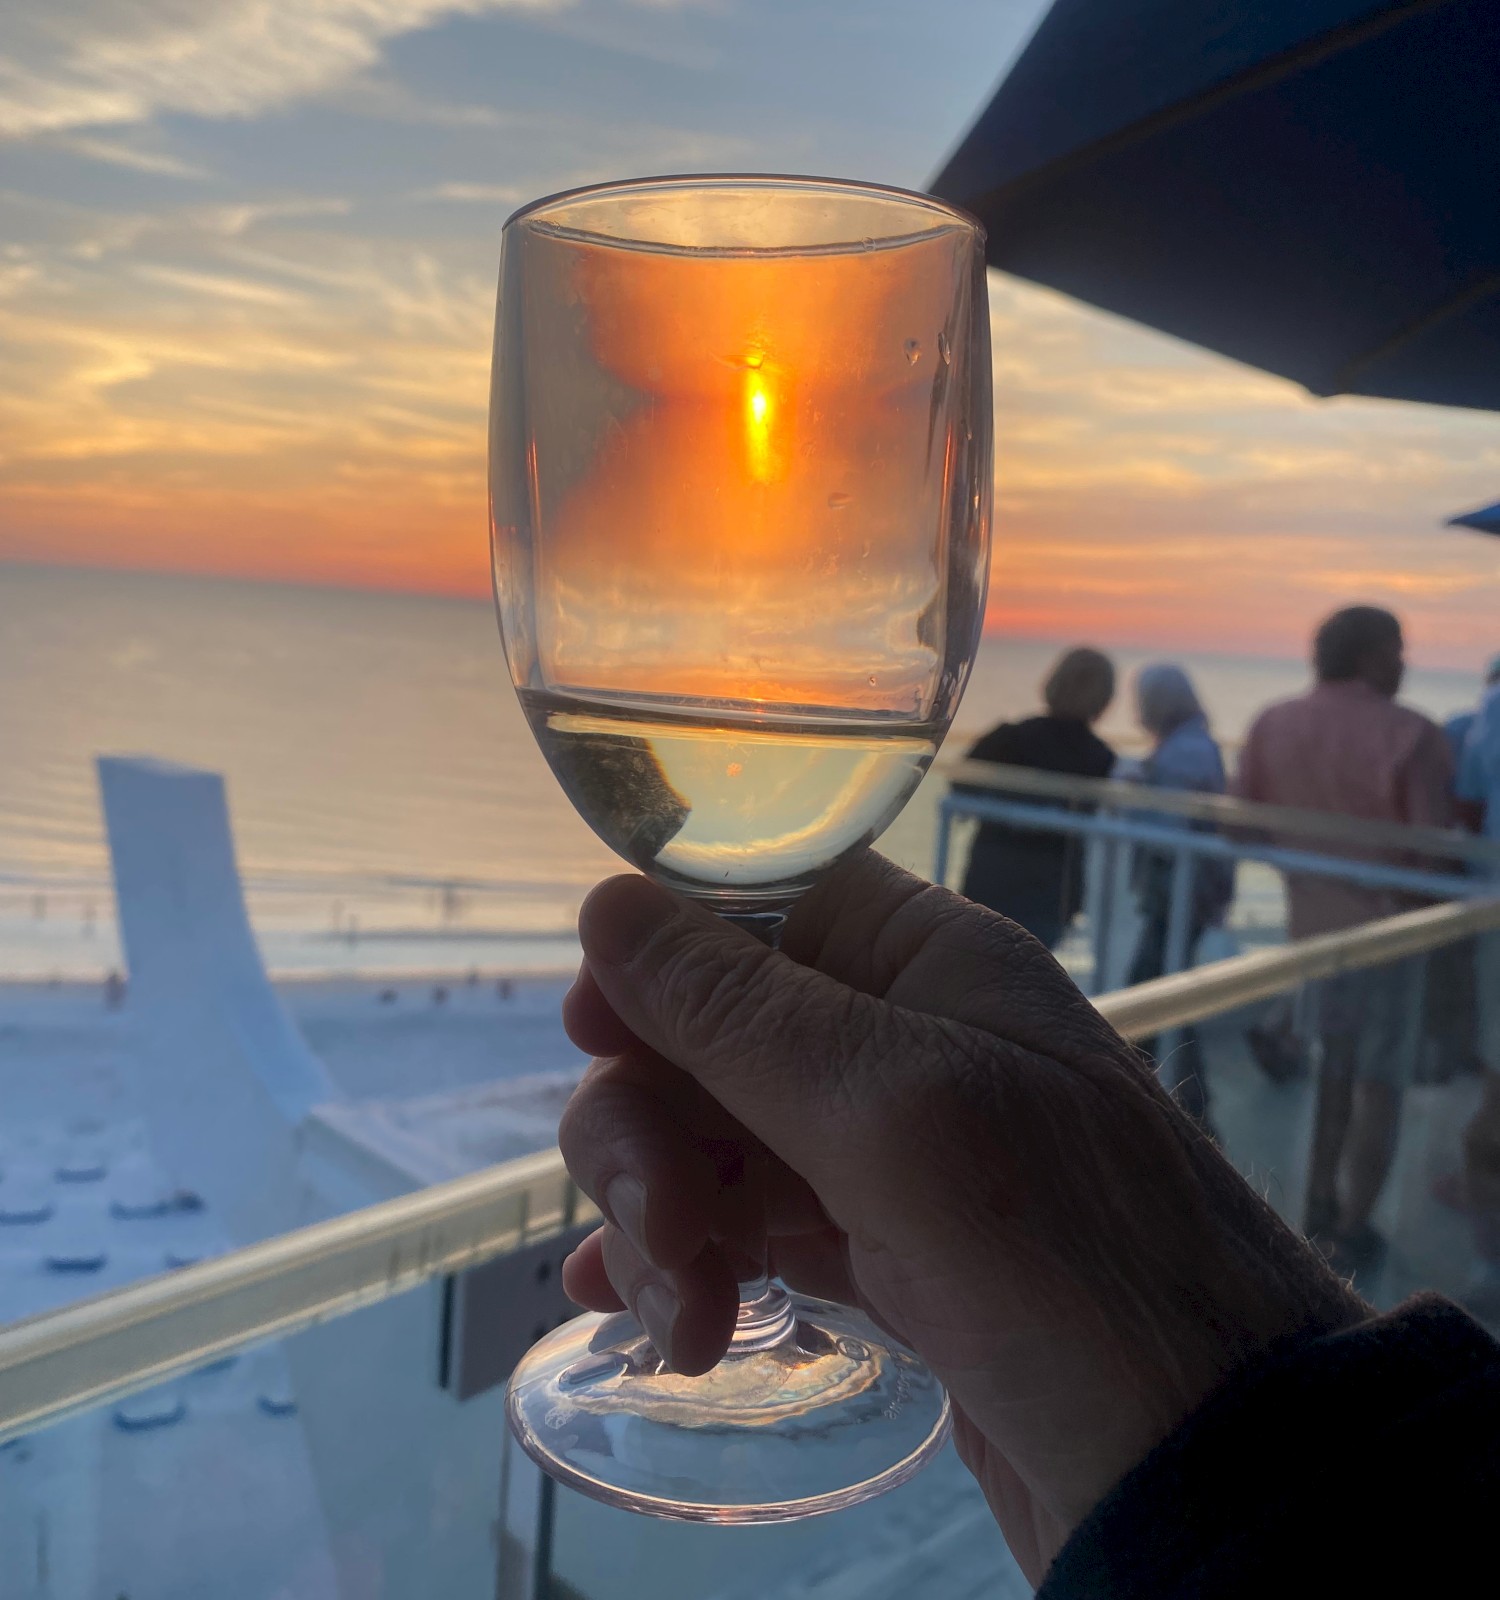 A hand holding a wine glass, with the sunset reflecting through it, and a coastal view with people in the background.